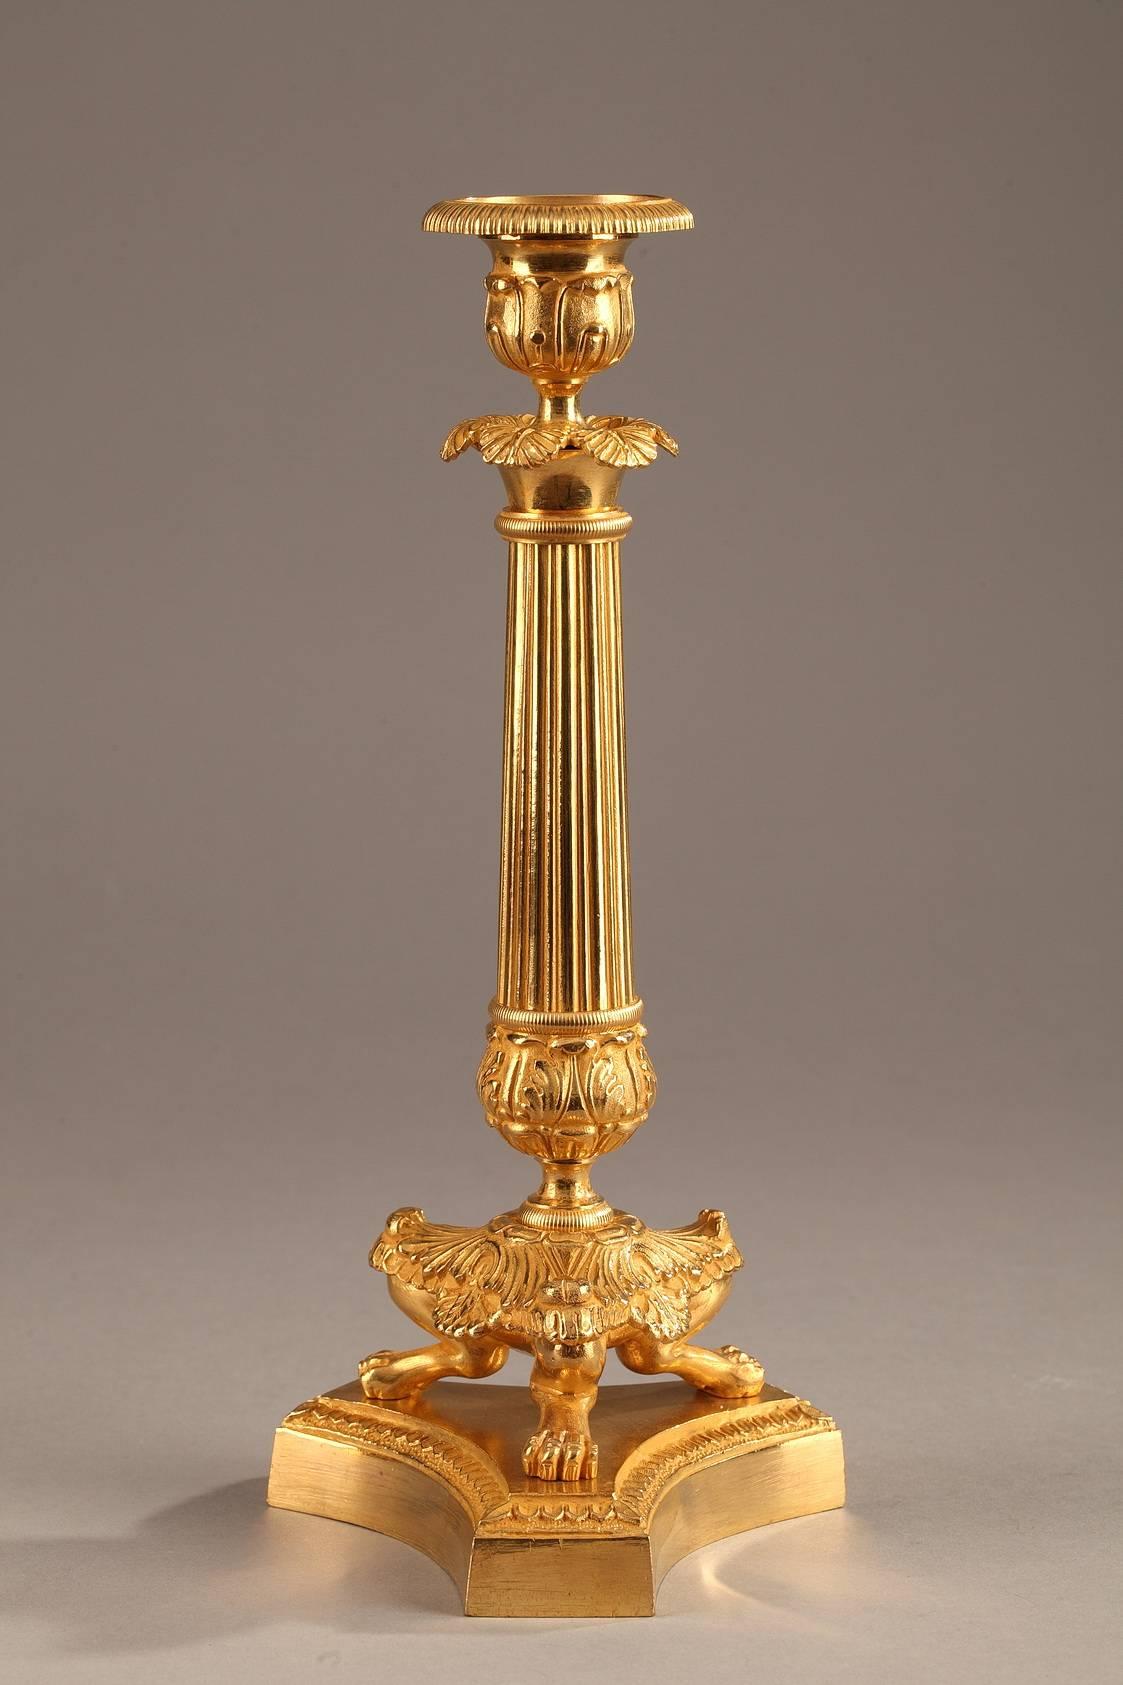 Pair of candlesticks in gilt bronze. They are in the shape of columns that rest on three clawed feet and are set on a three-pointed base. The fluted shafts of the candlesticks are intricately sculpted with acanthus leaves and palmette. Restauration